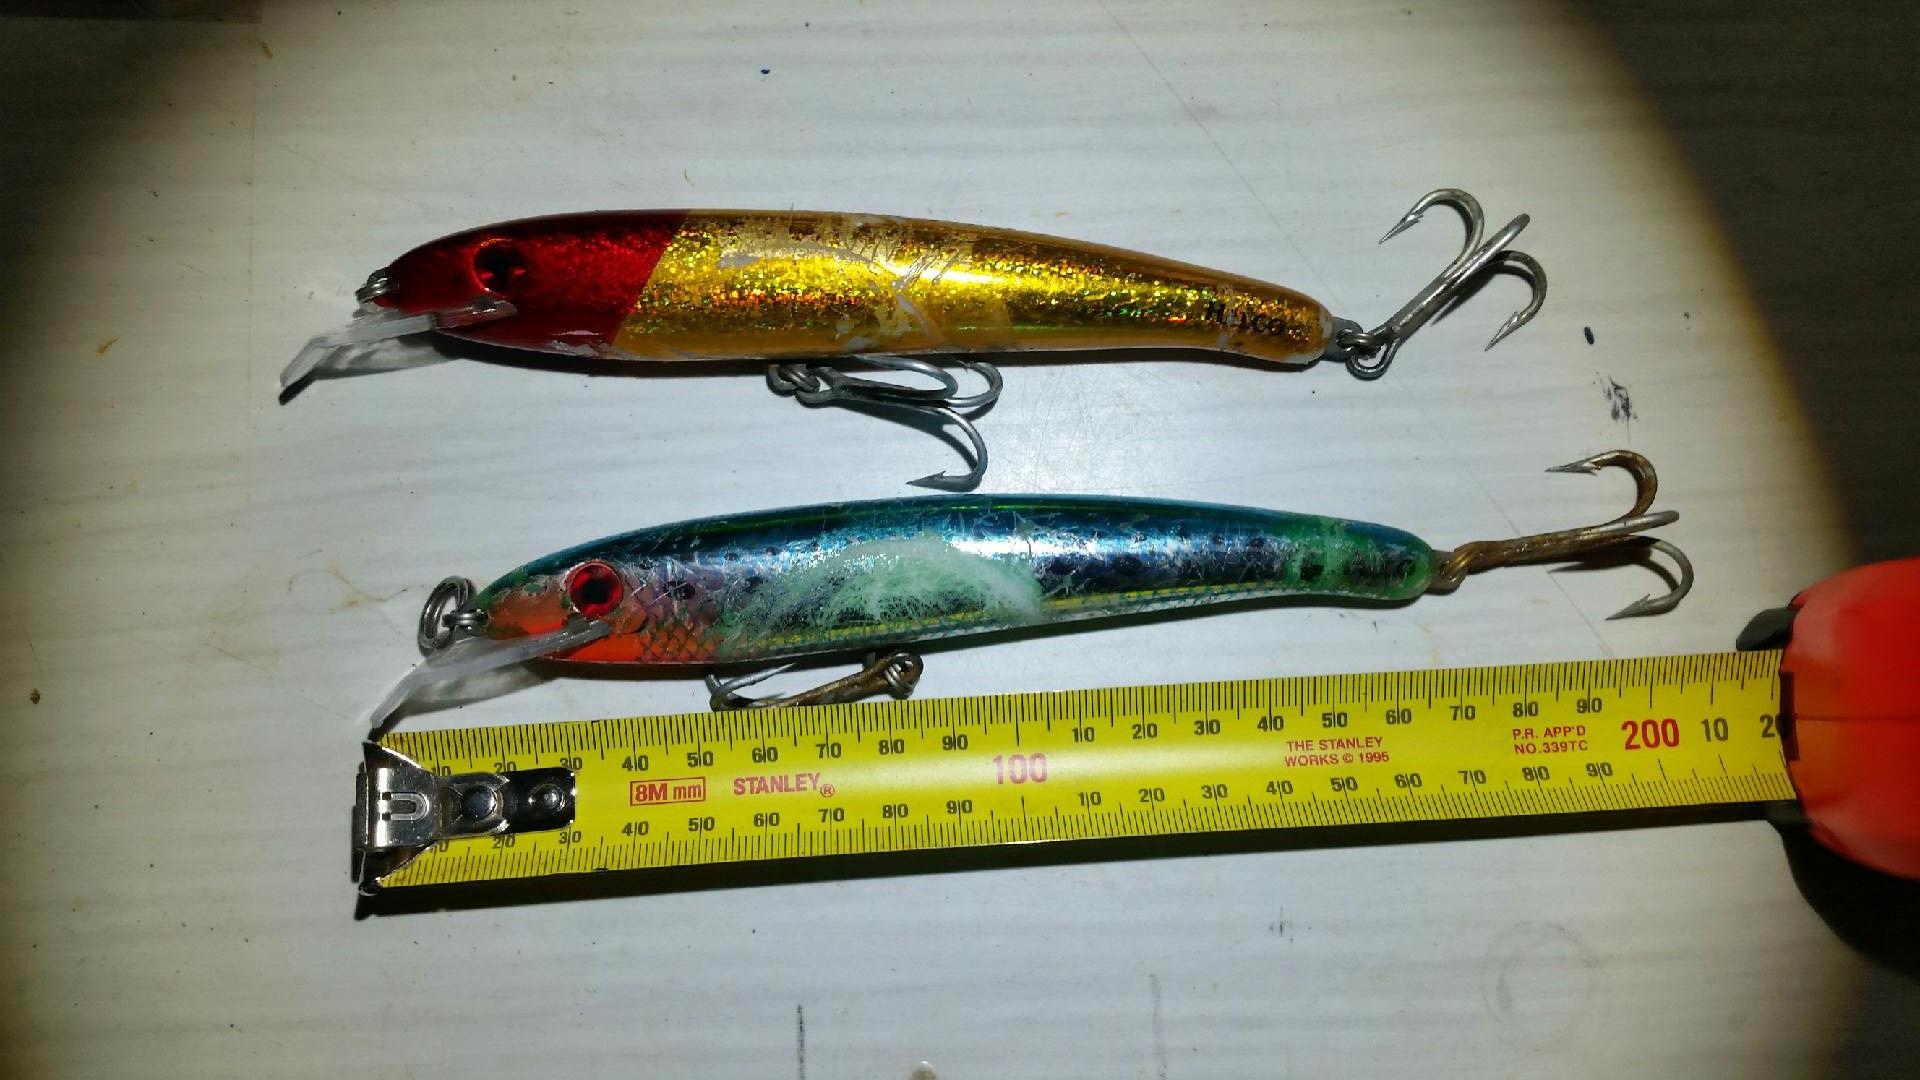 If you could only pick one, what lure would you use for tuna